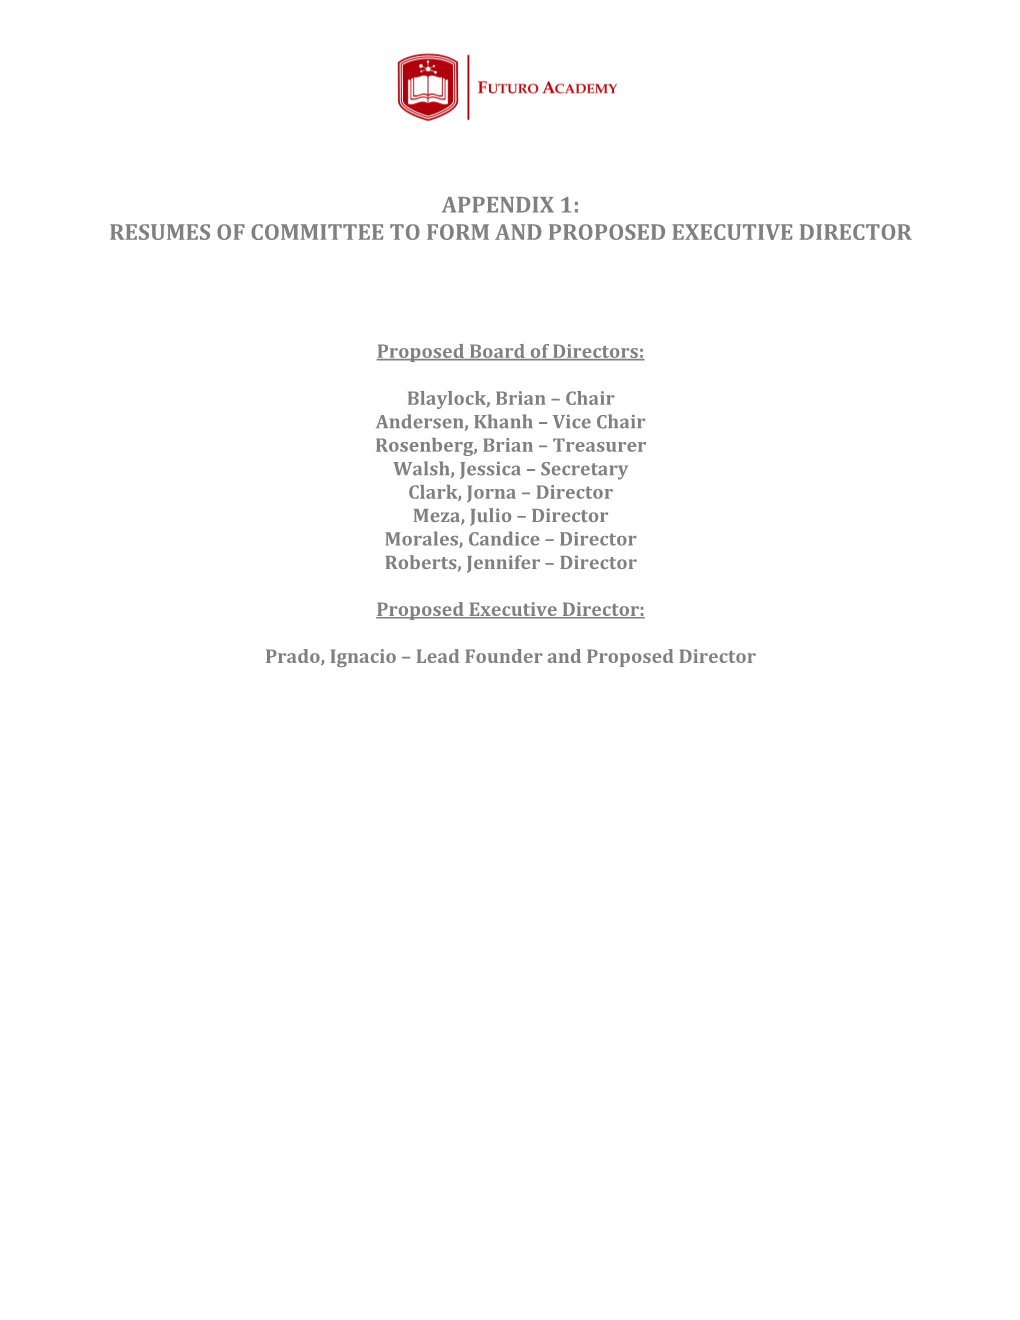 Appendix 1: Resumes of Committee to Form and Proposed Executive Director